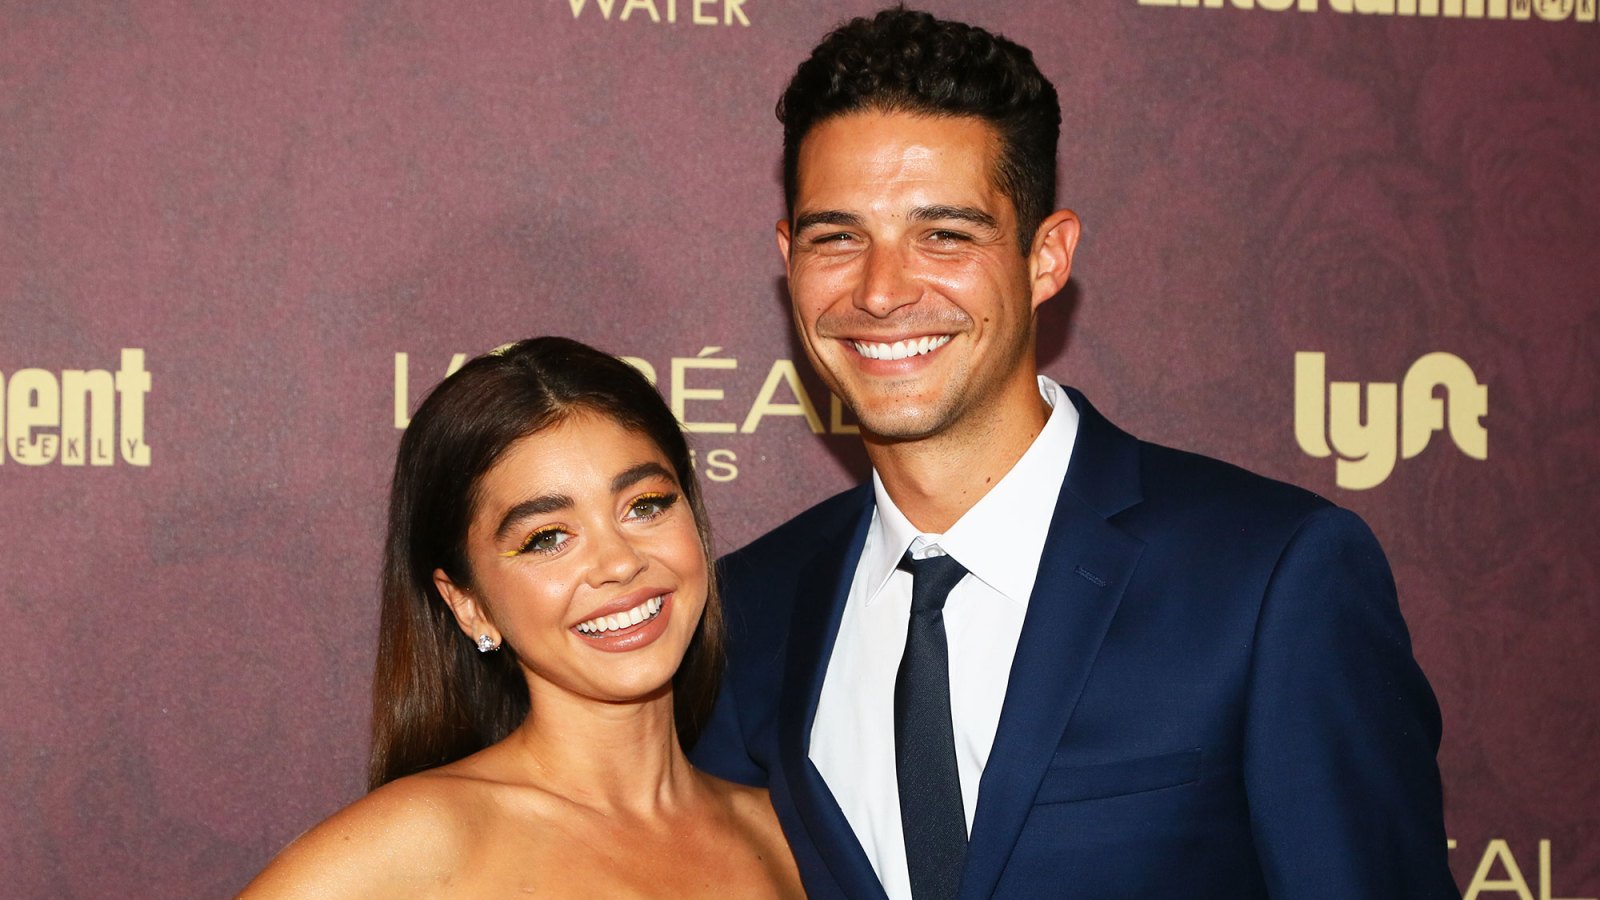 WELLS ADAMS AND SARAH HYLAND'S CUTEST QUOTES ABOUT THEIR LOVE STORY